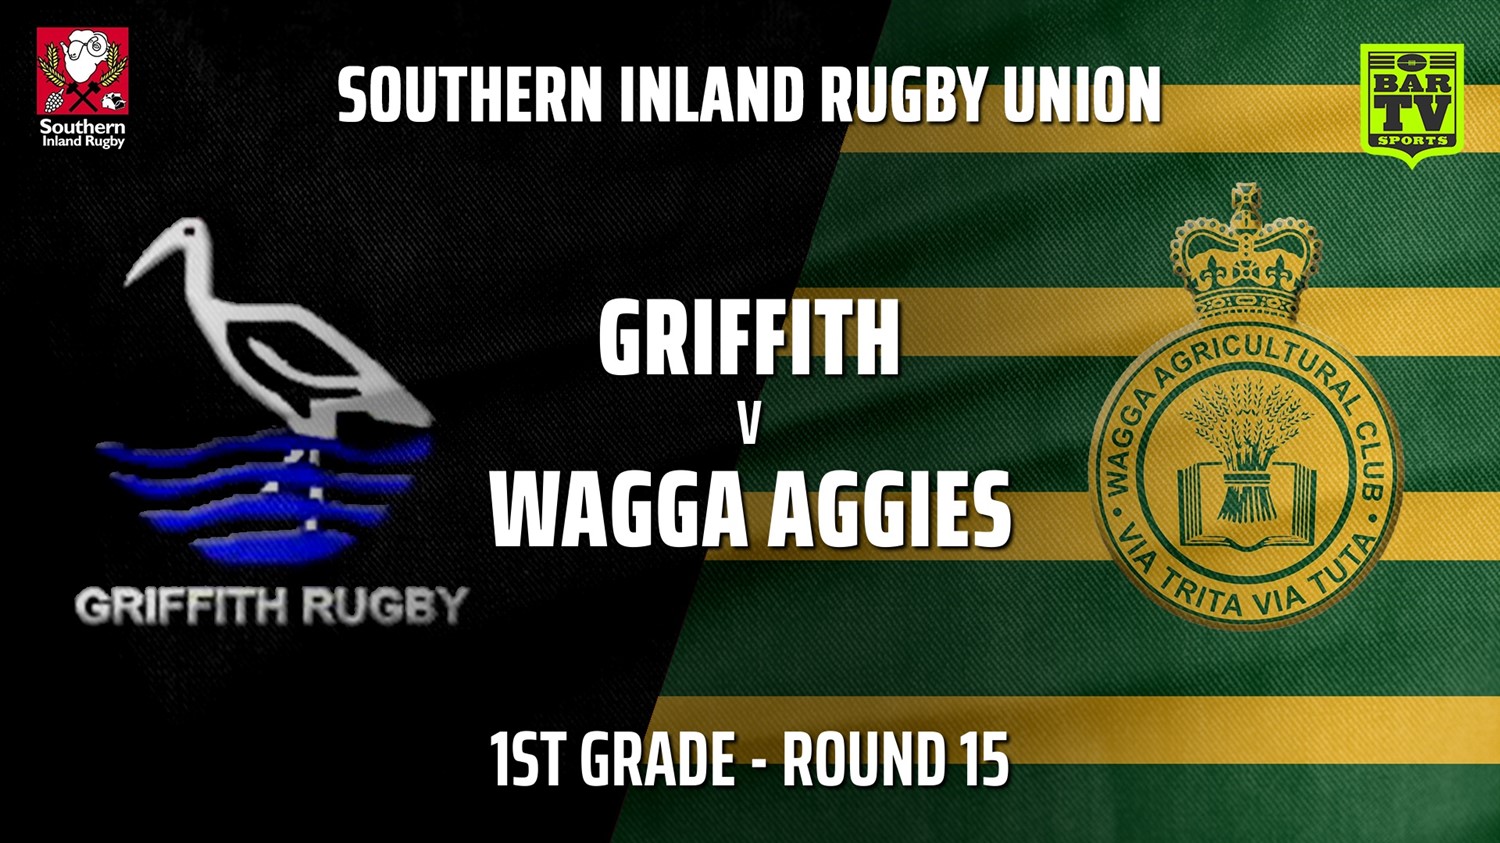 210724-Southern Inland Rugby Union Round 15 - 1st Grade - Griffith v Wagga Agricultural College Slate Image